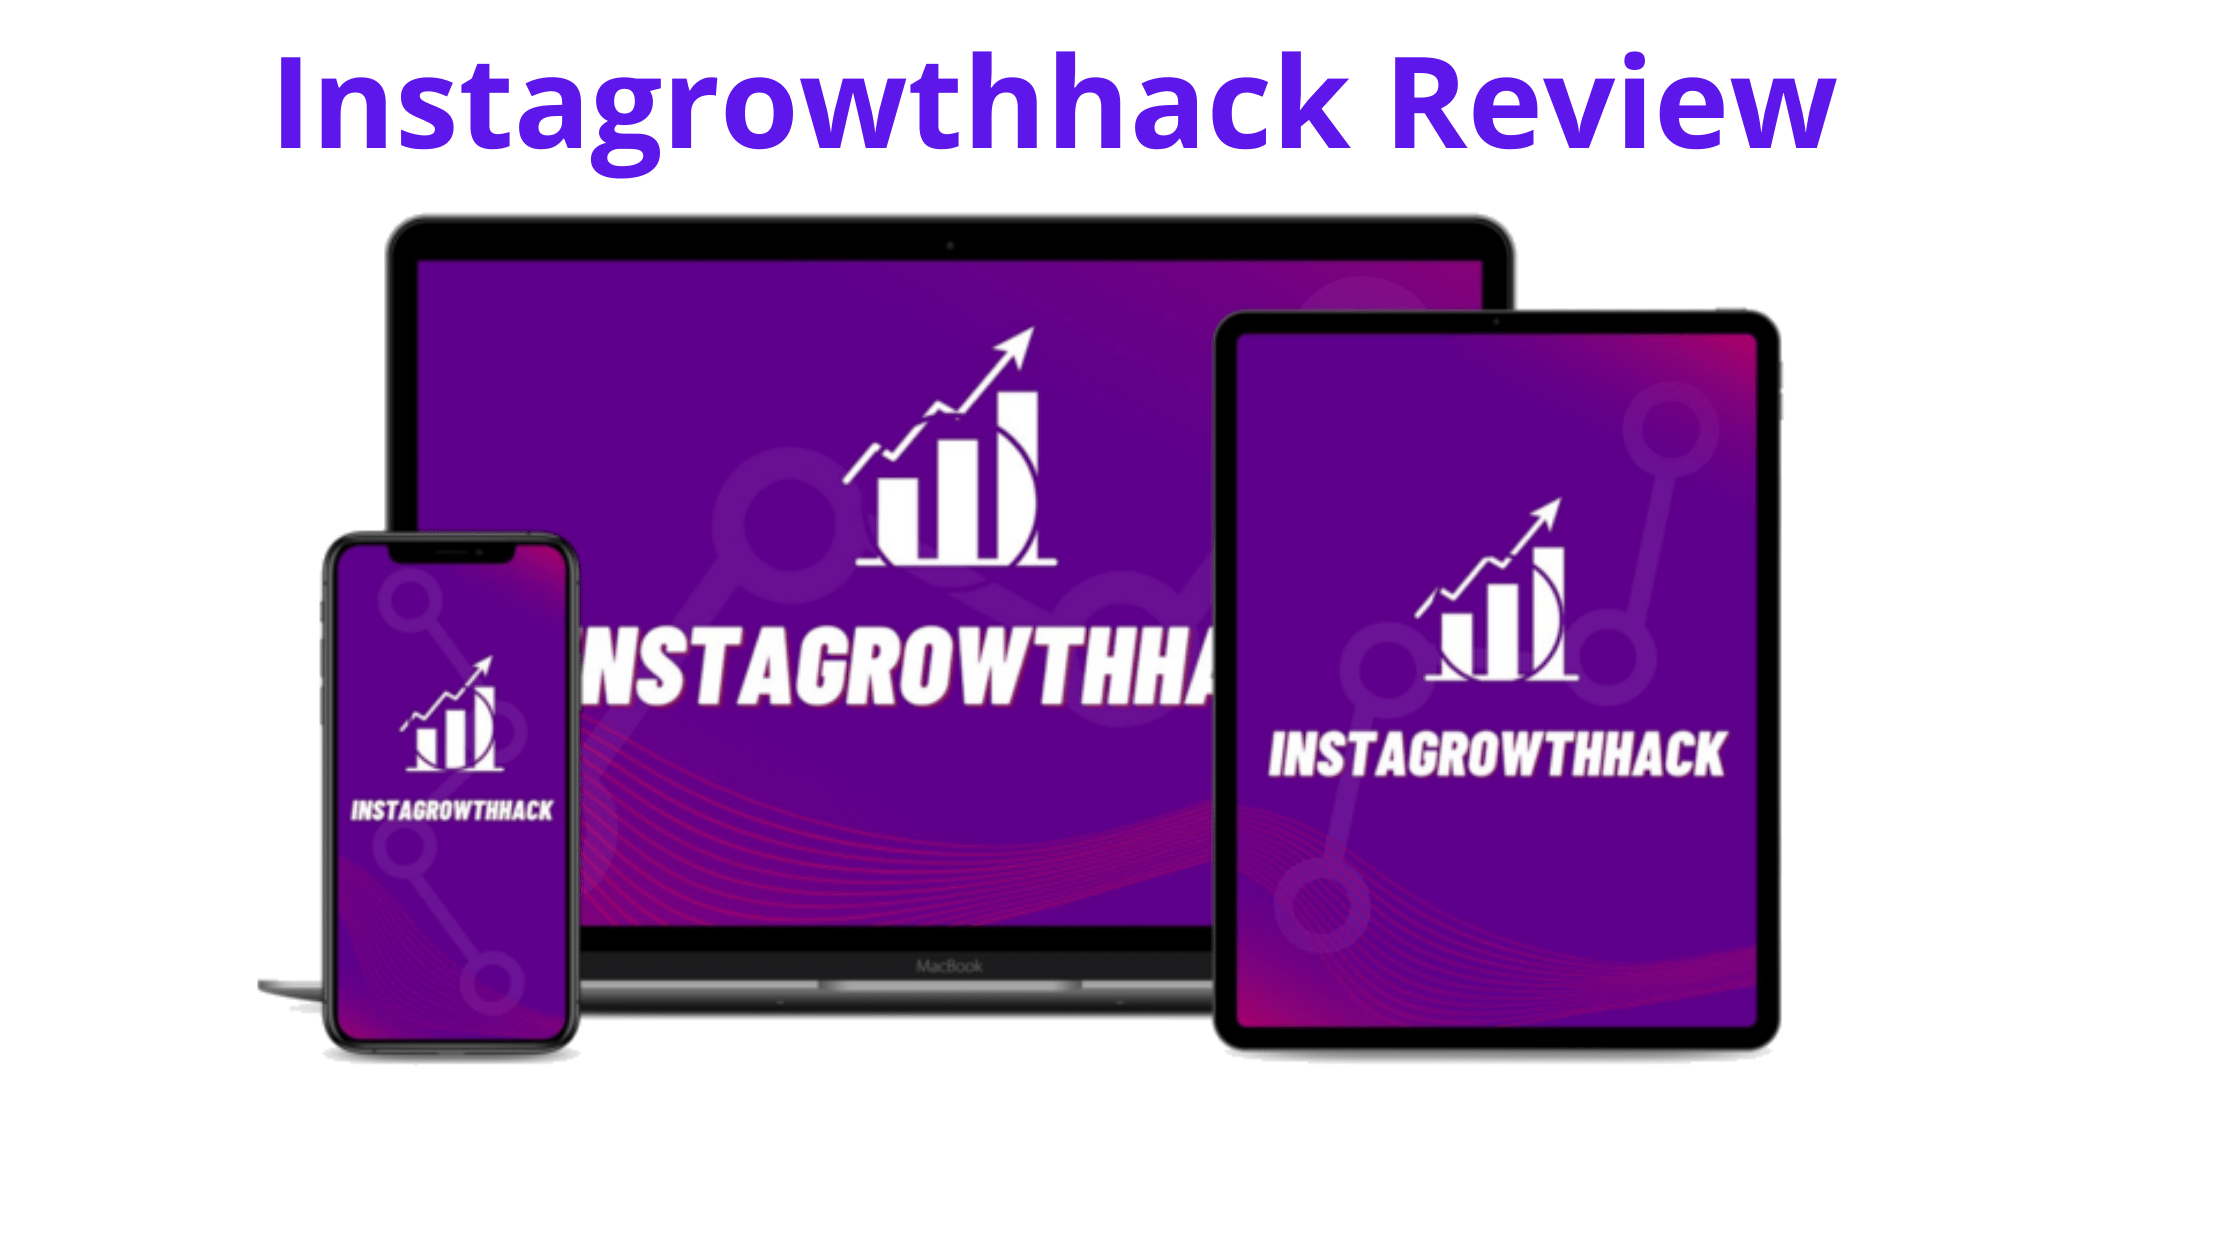 Instagrowthhack Review